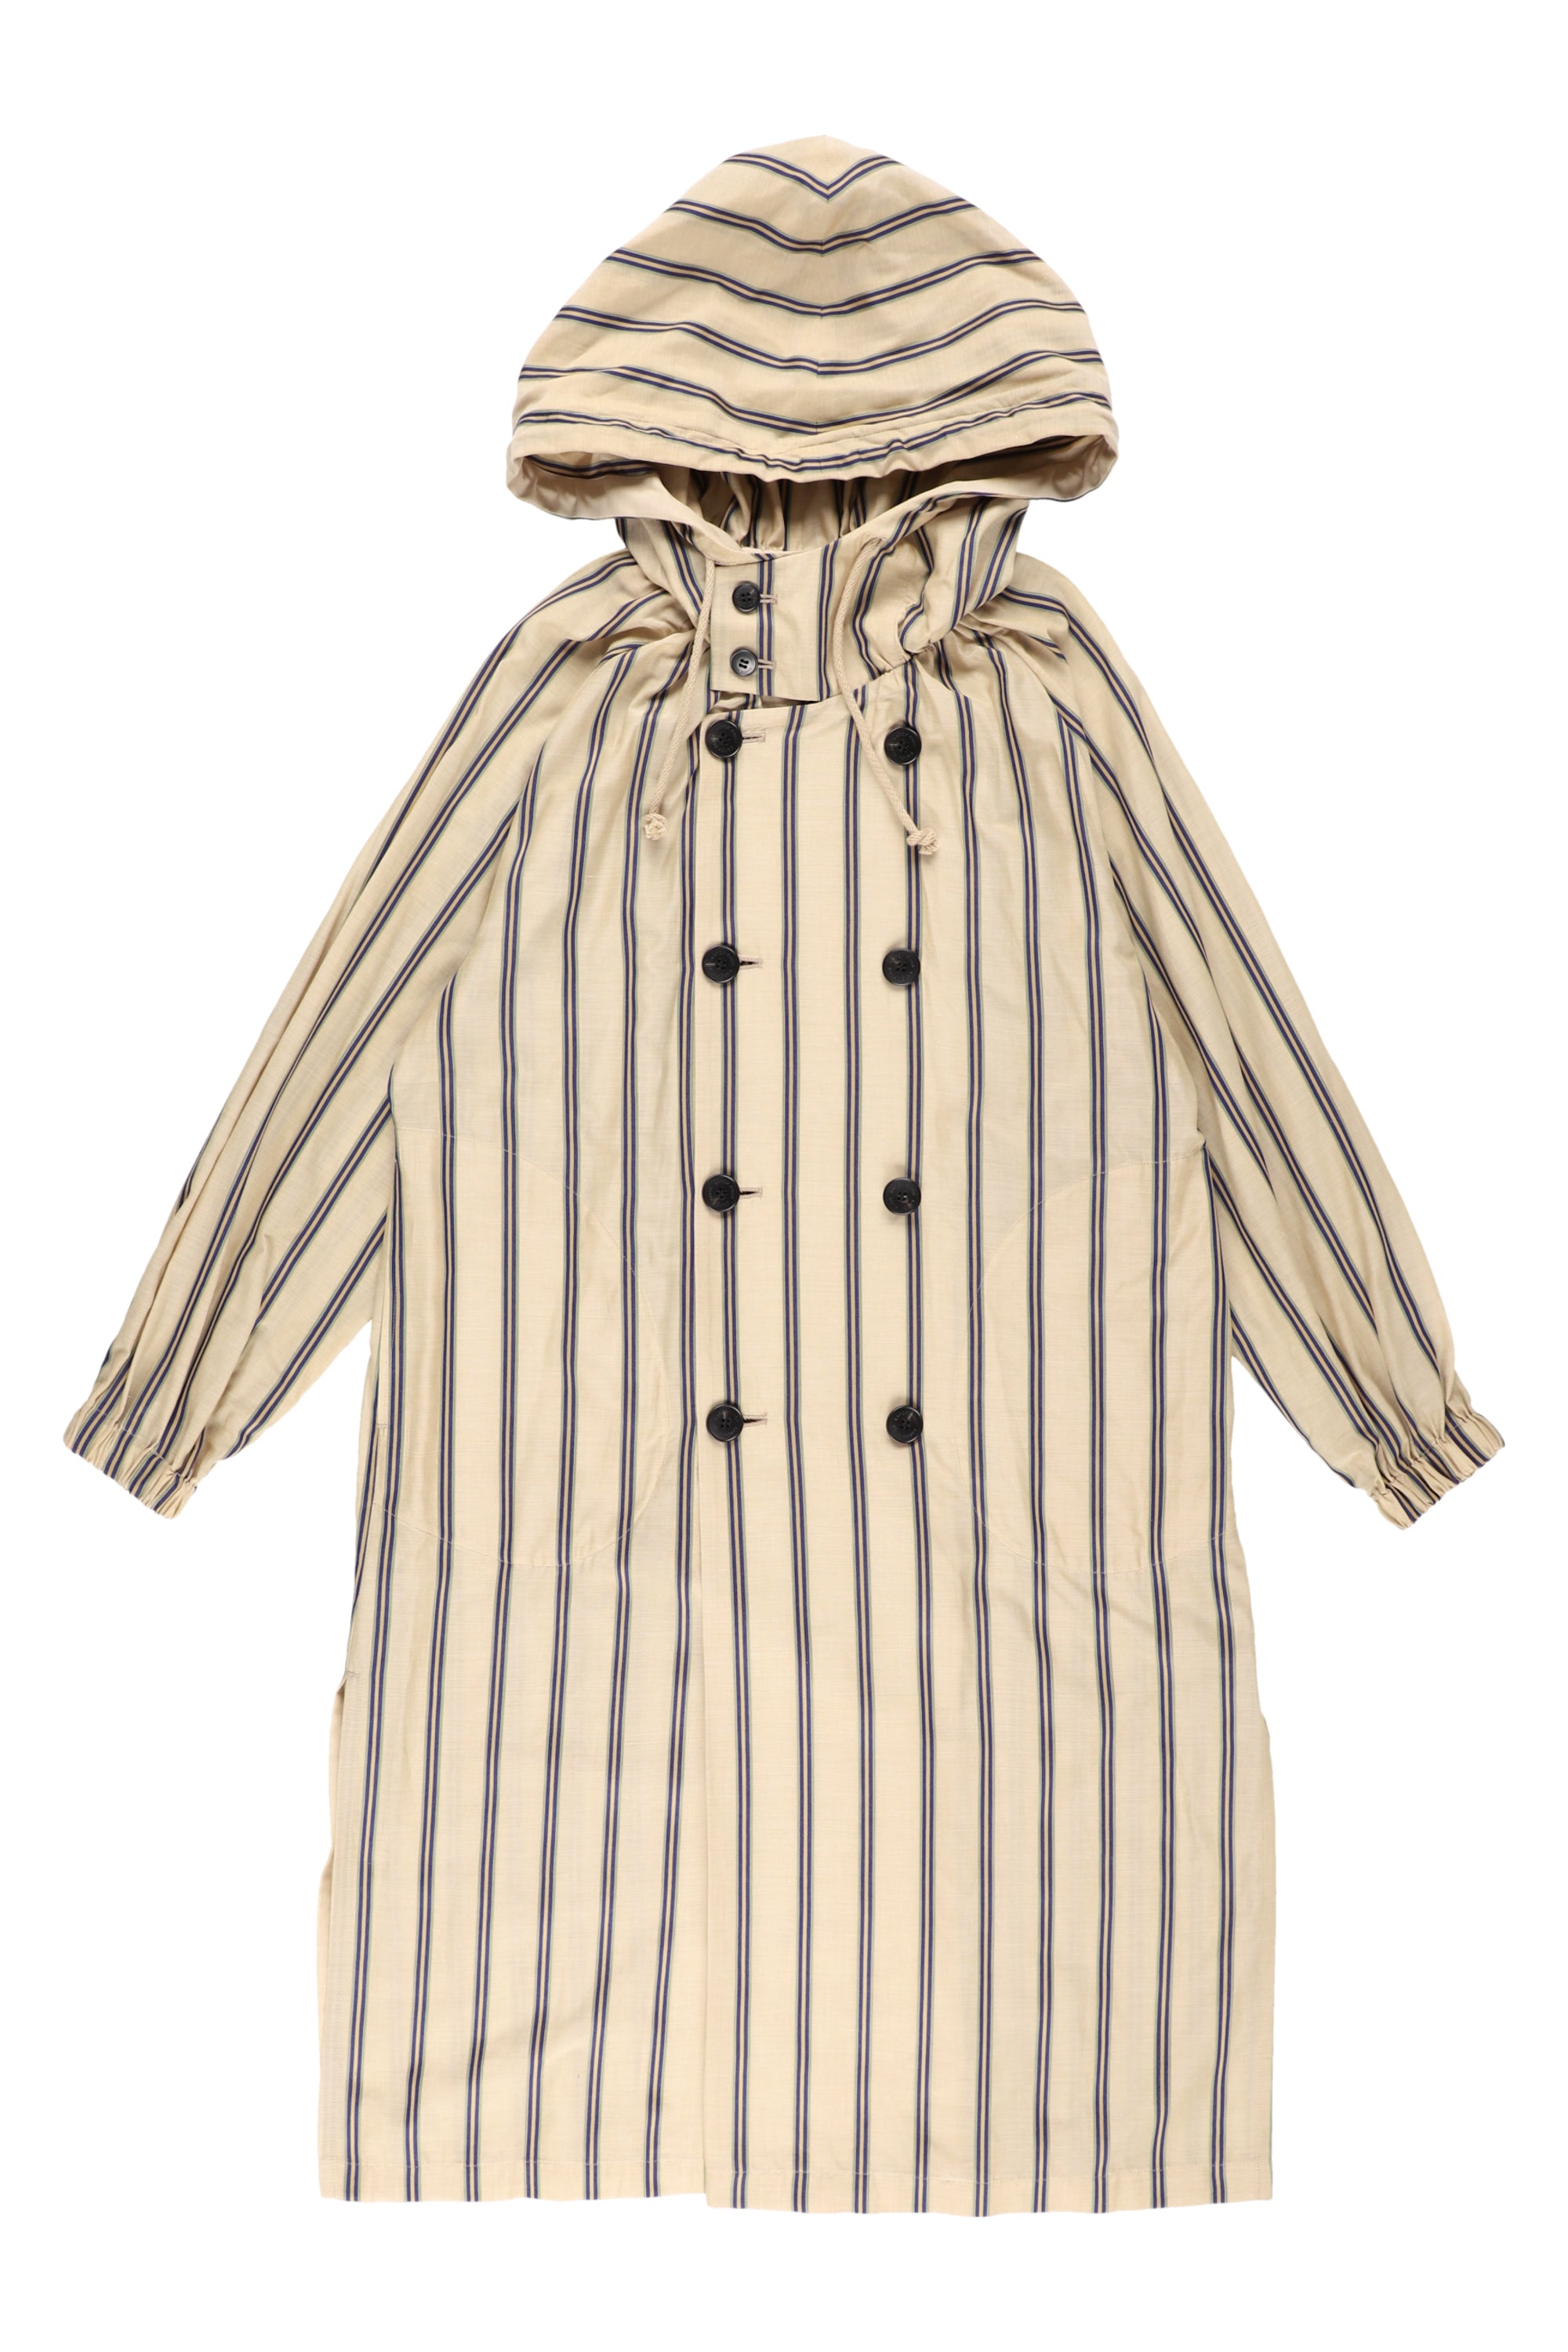 Hood trench: Striped - Unisex 